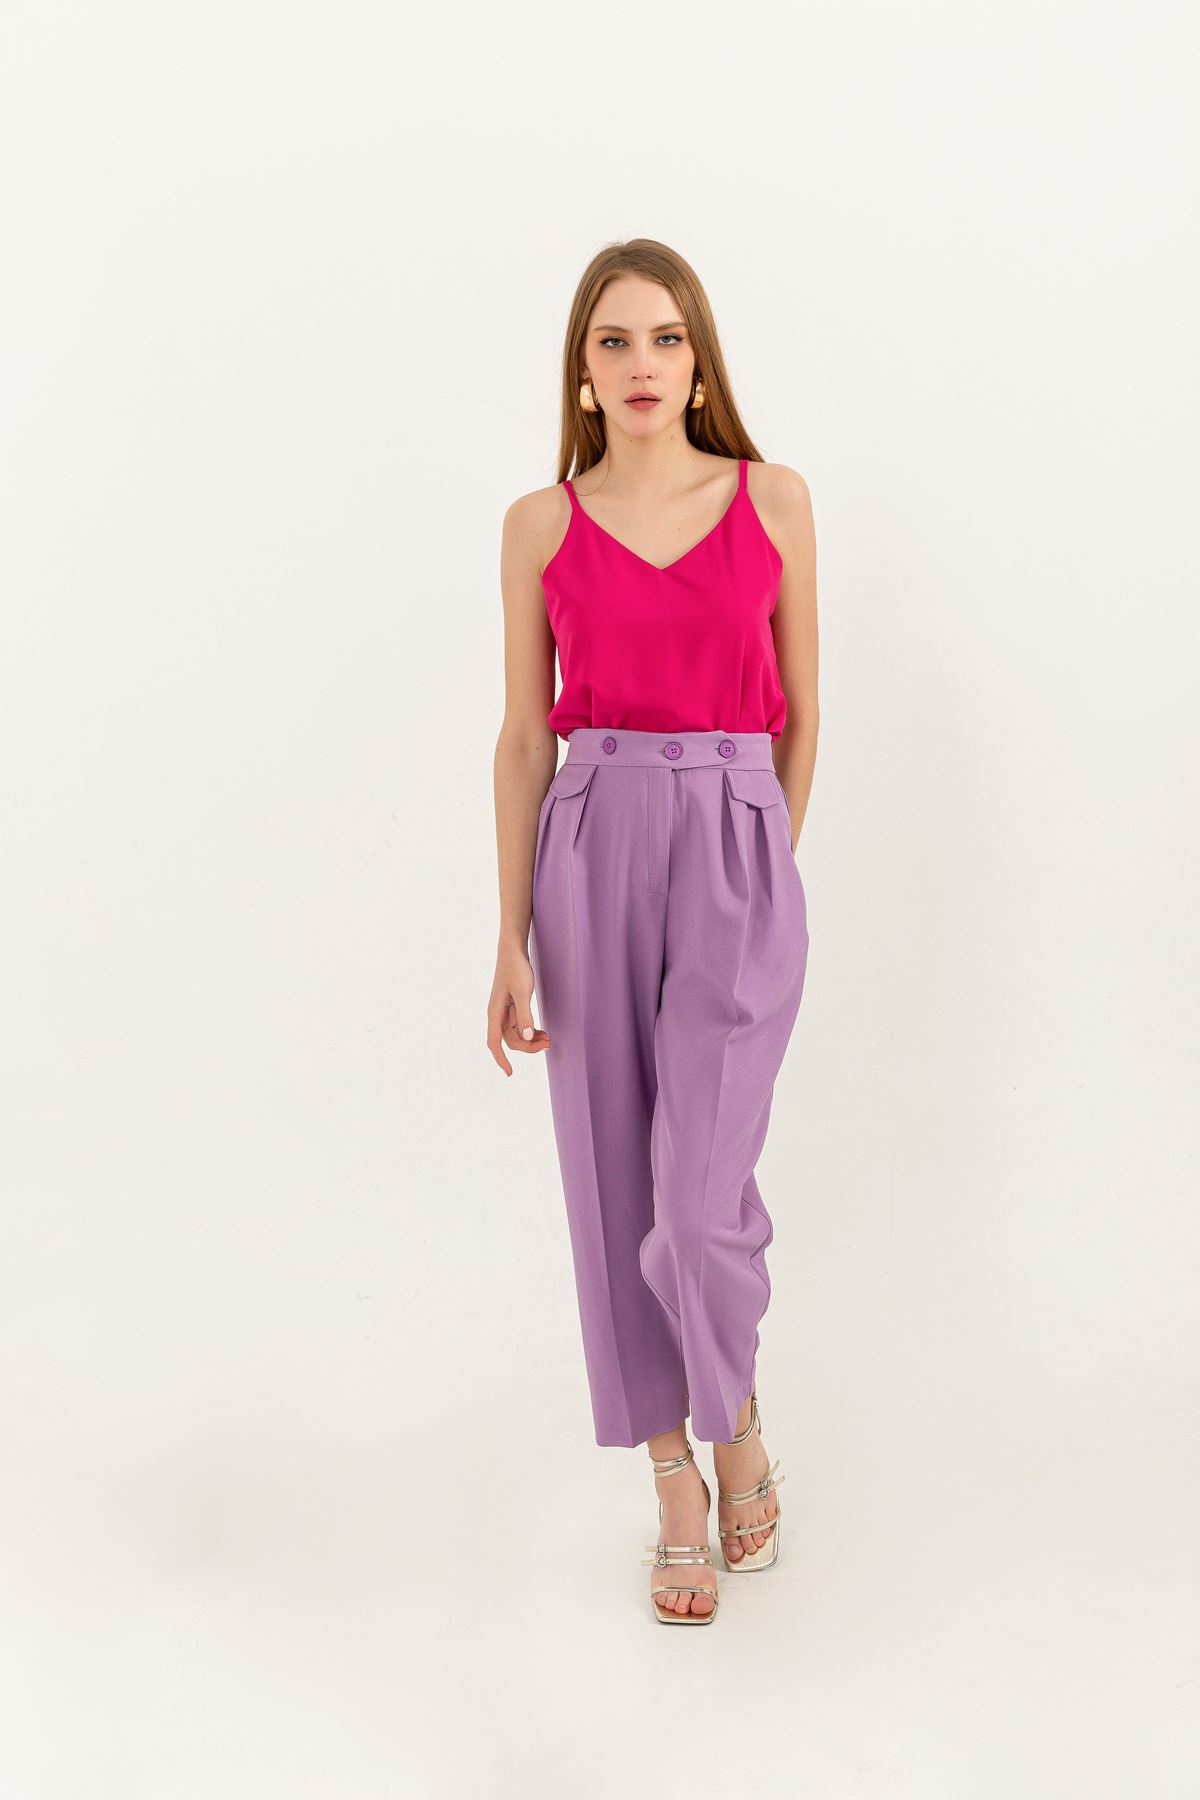 Atlas Fabric Ankle Length Carrot Style Women Trouser-Lilac